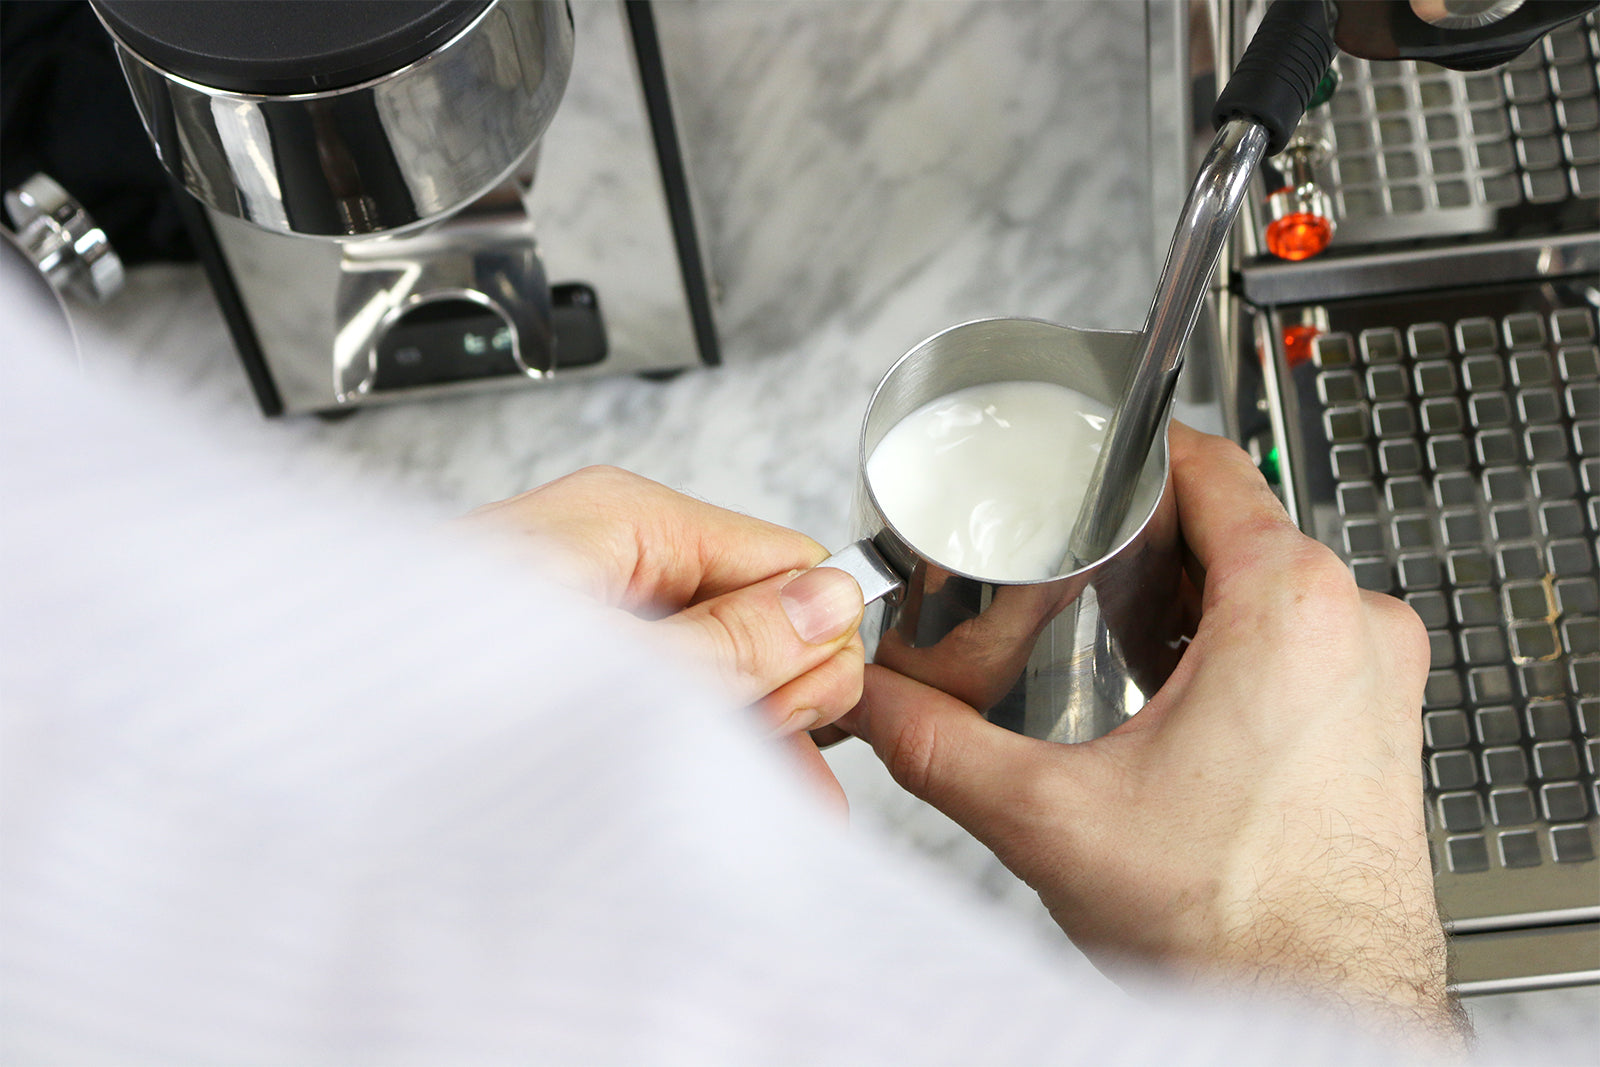 Getting the Most from a Milk Steamer